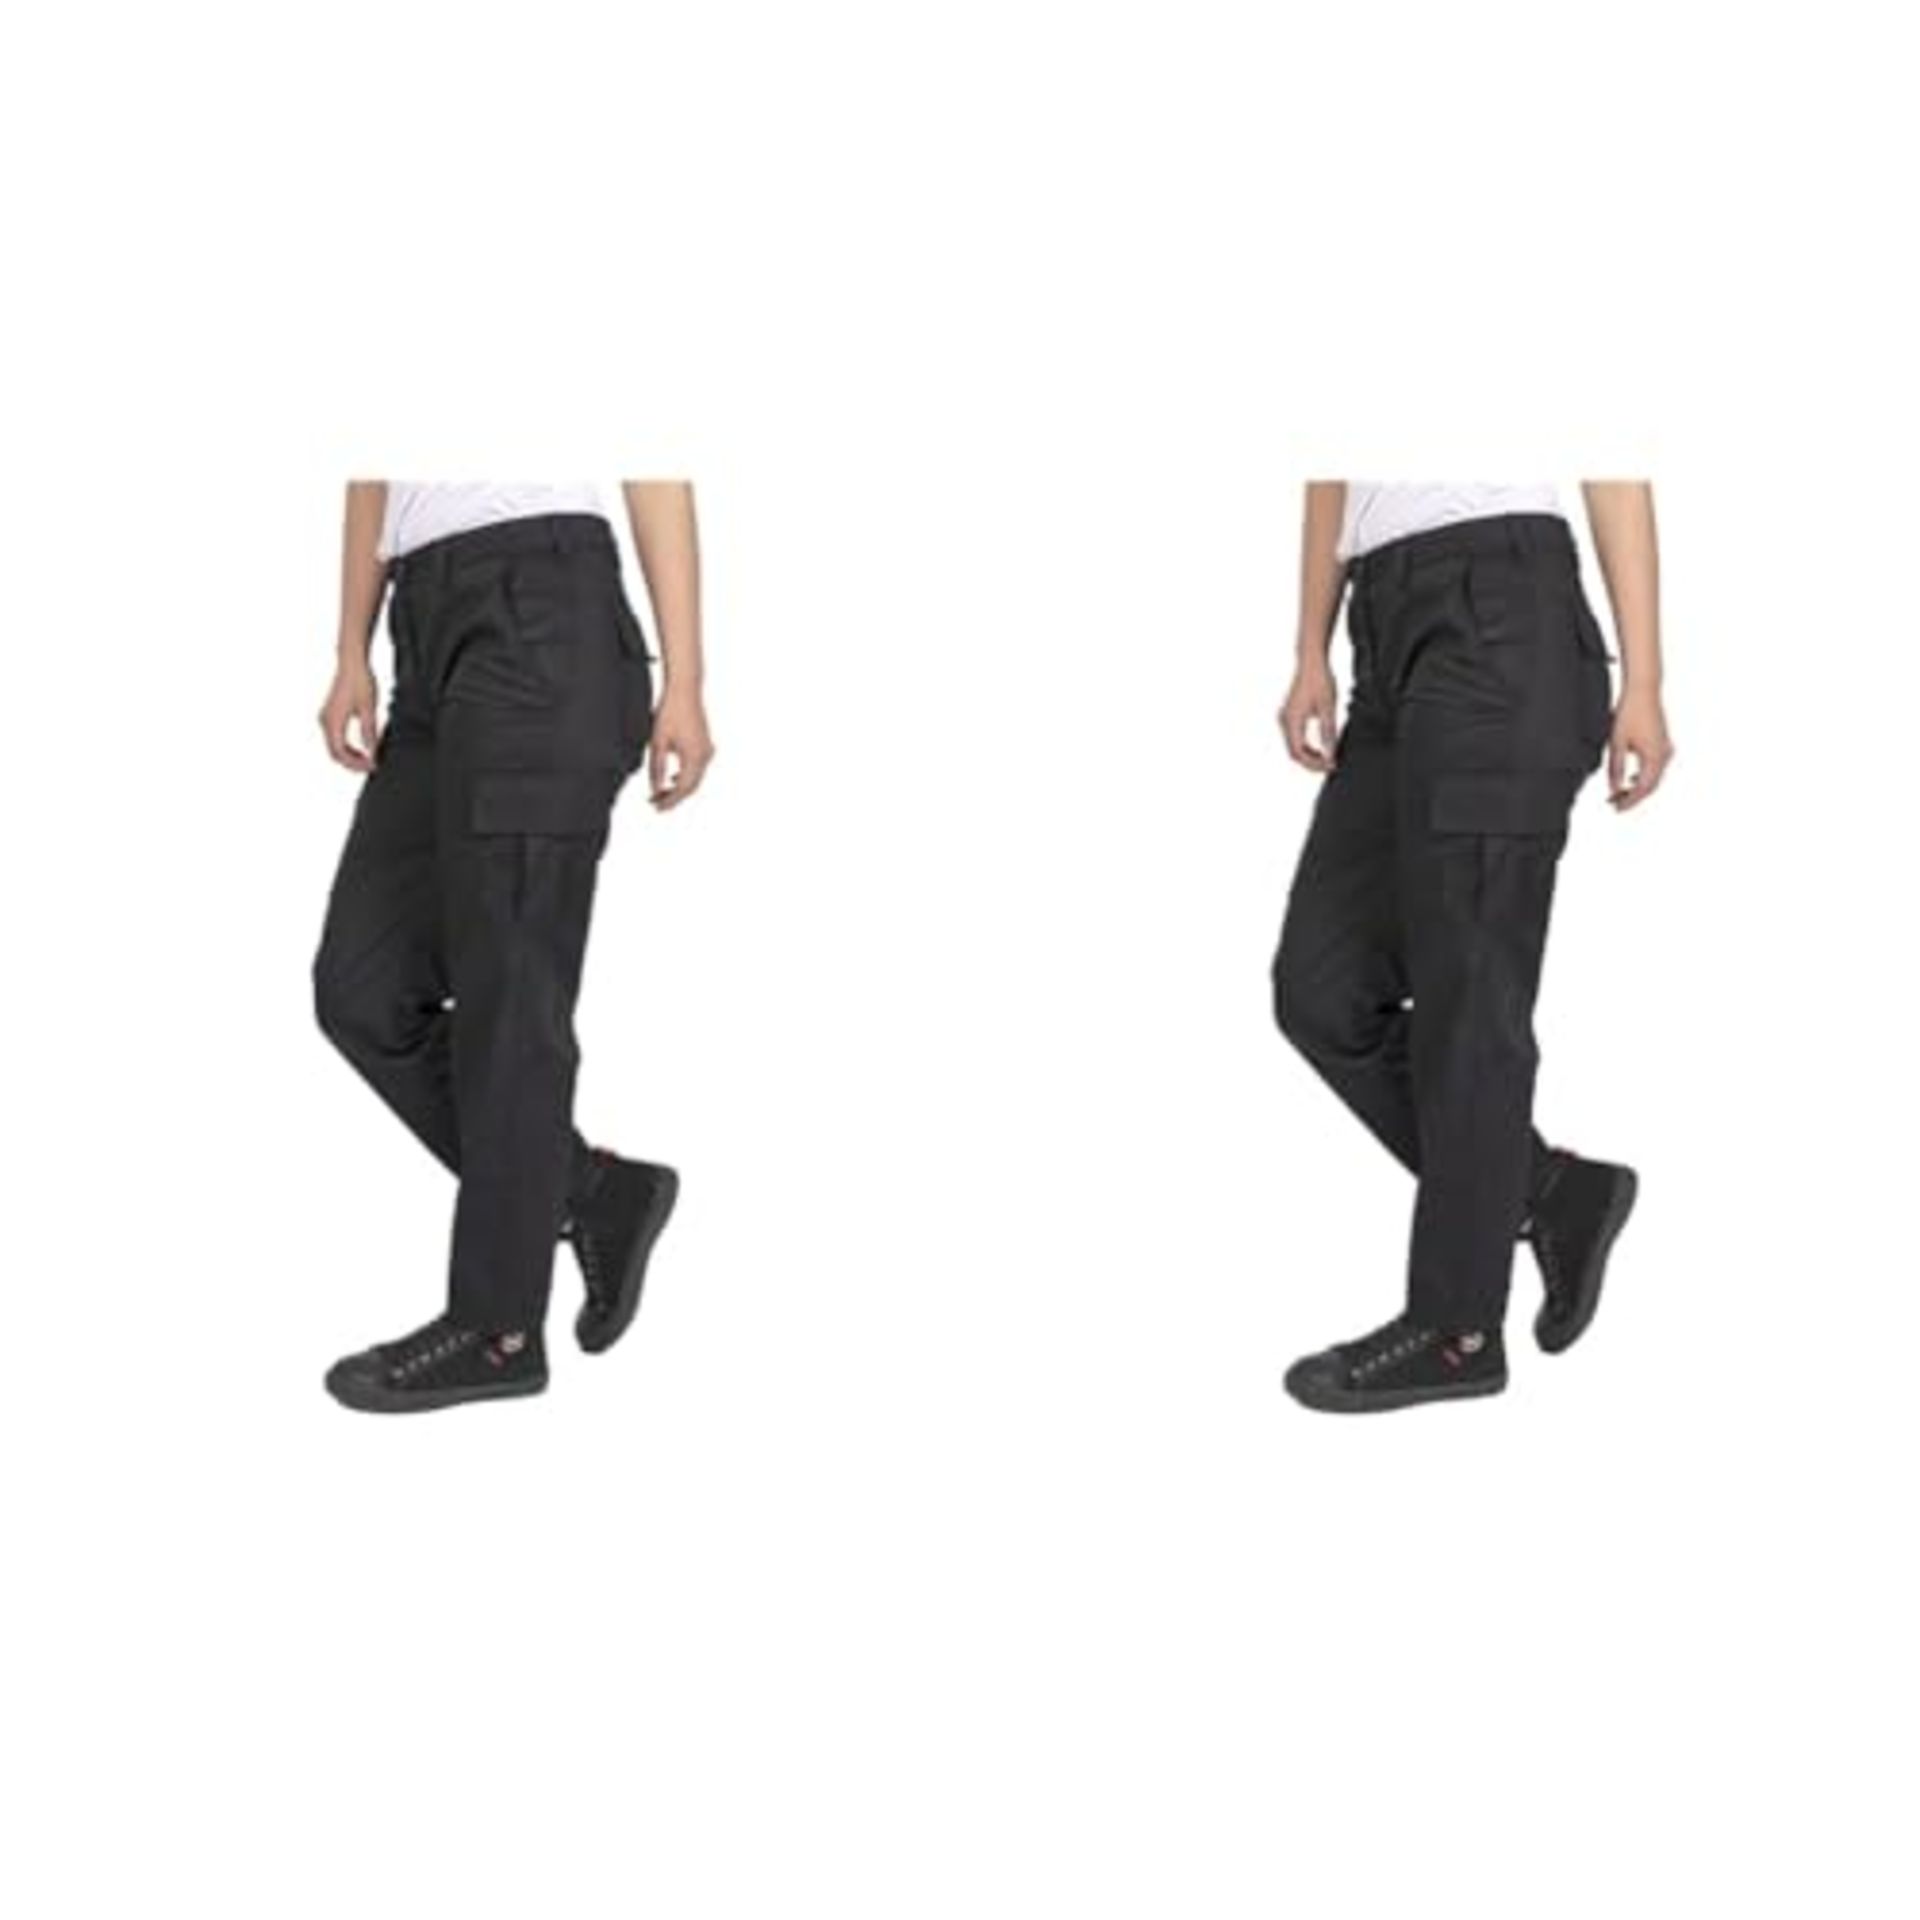 Lee Cooper Ladies Heavy Duty Easy Care Multi Pocket Work Safety Classic Cargo Pants Tr